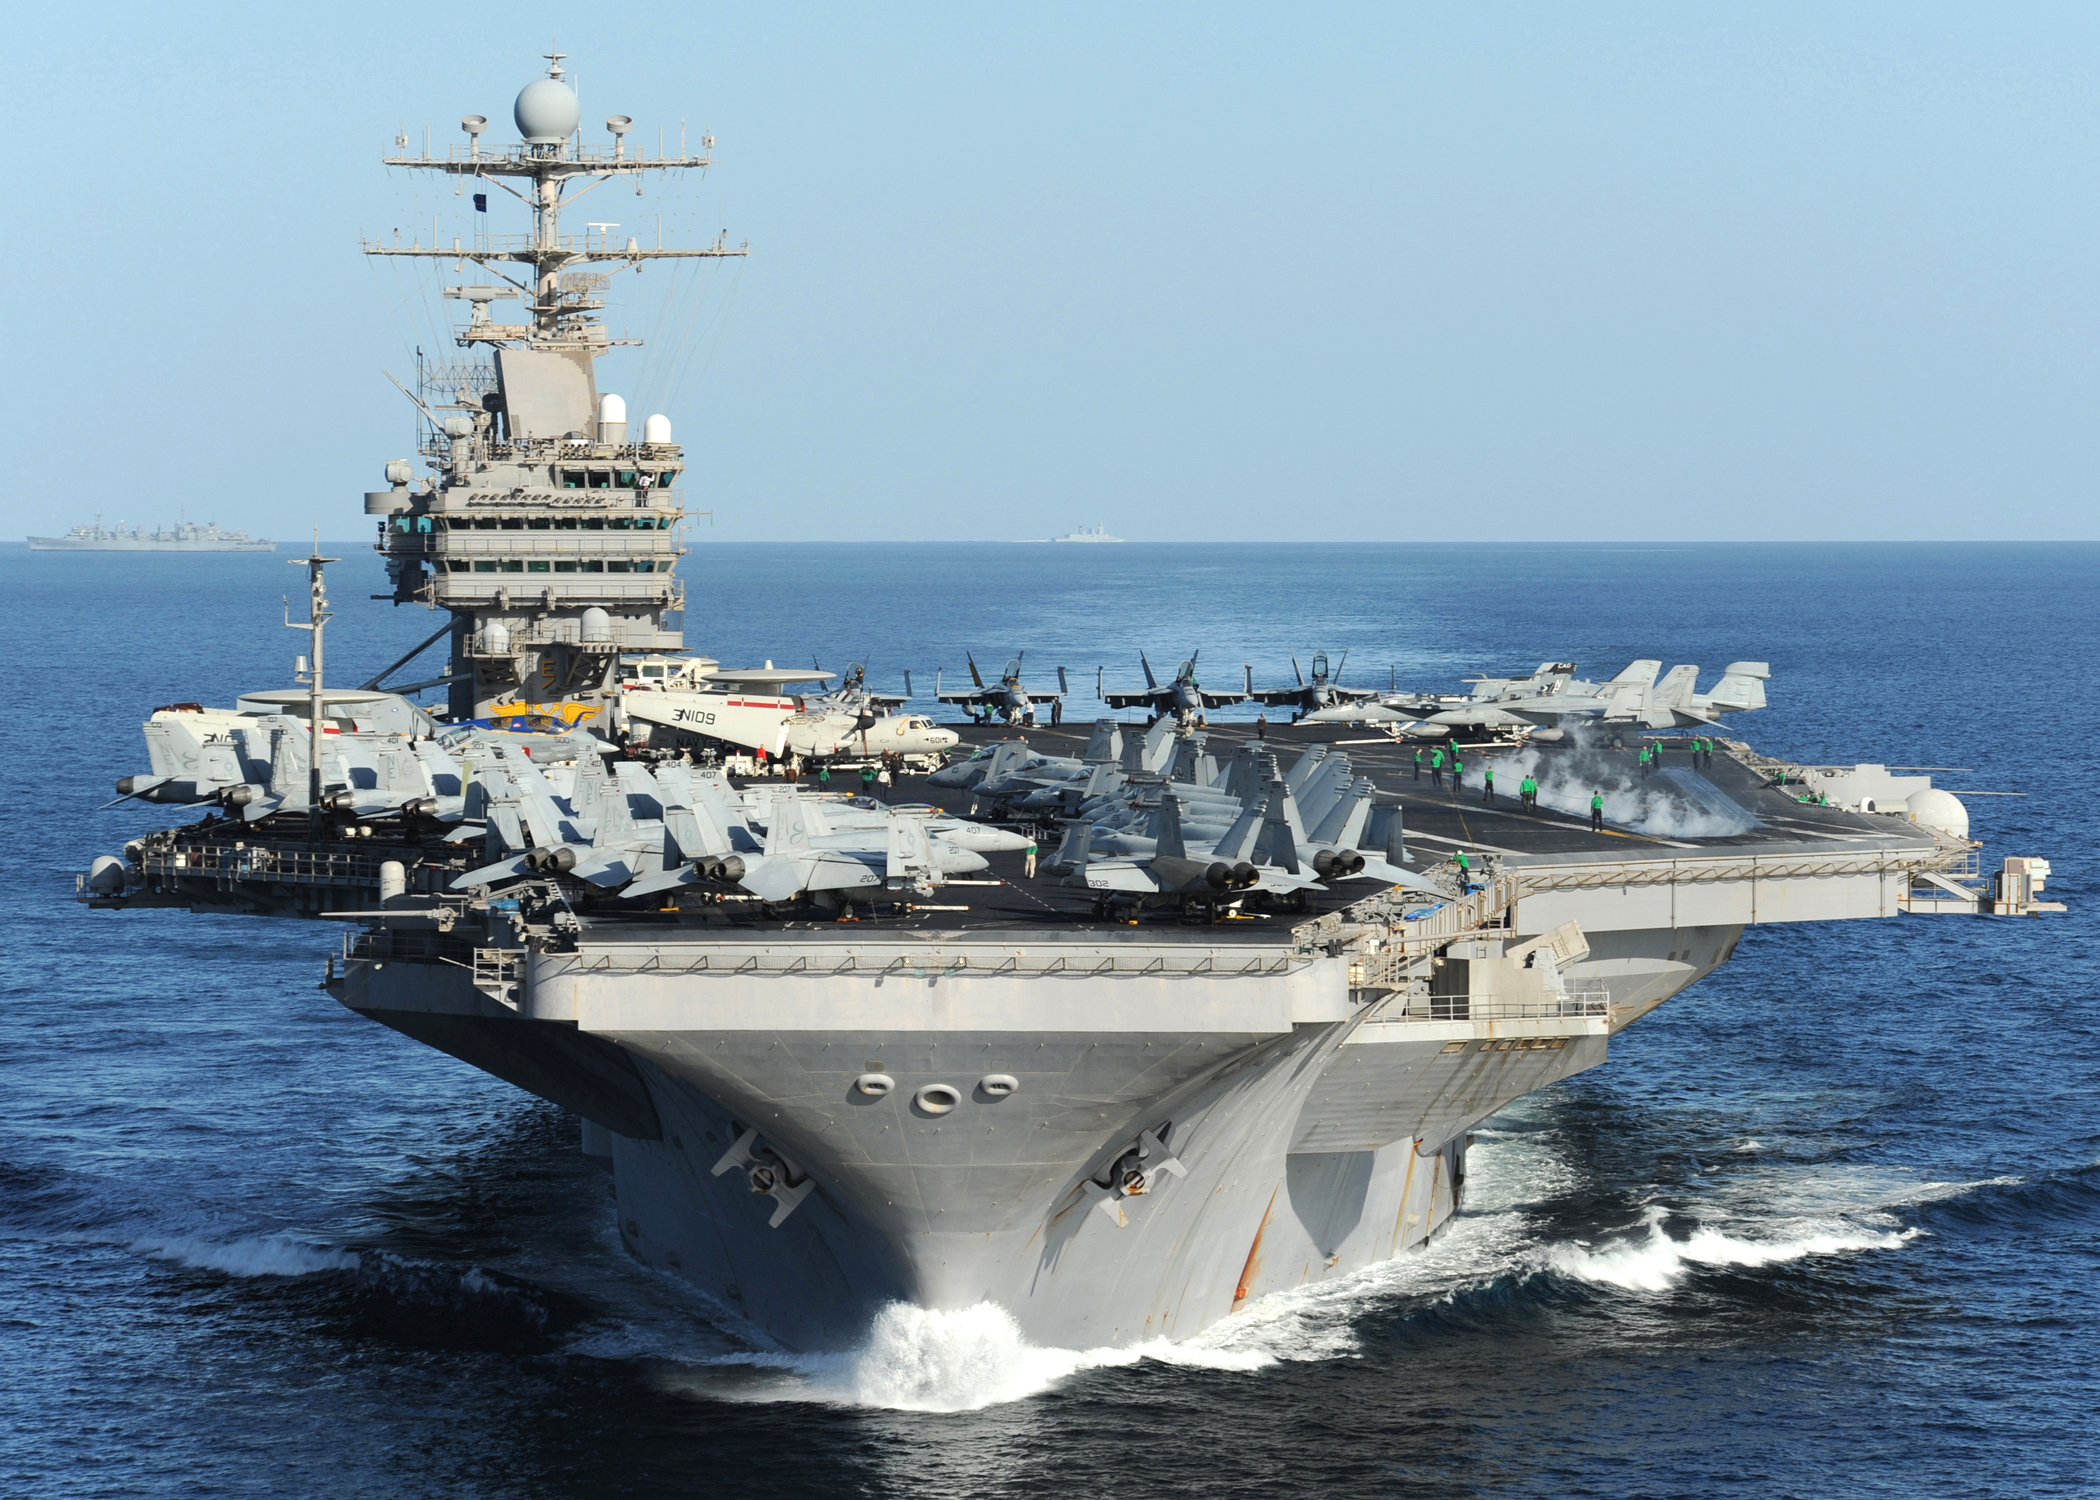 US Navy 101210-N-1261P-081 USS Abraham Lincoln (CVN 72) underway in the Arabian Sea in support of Operation Enduring Freedom